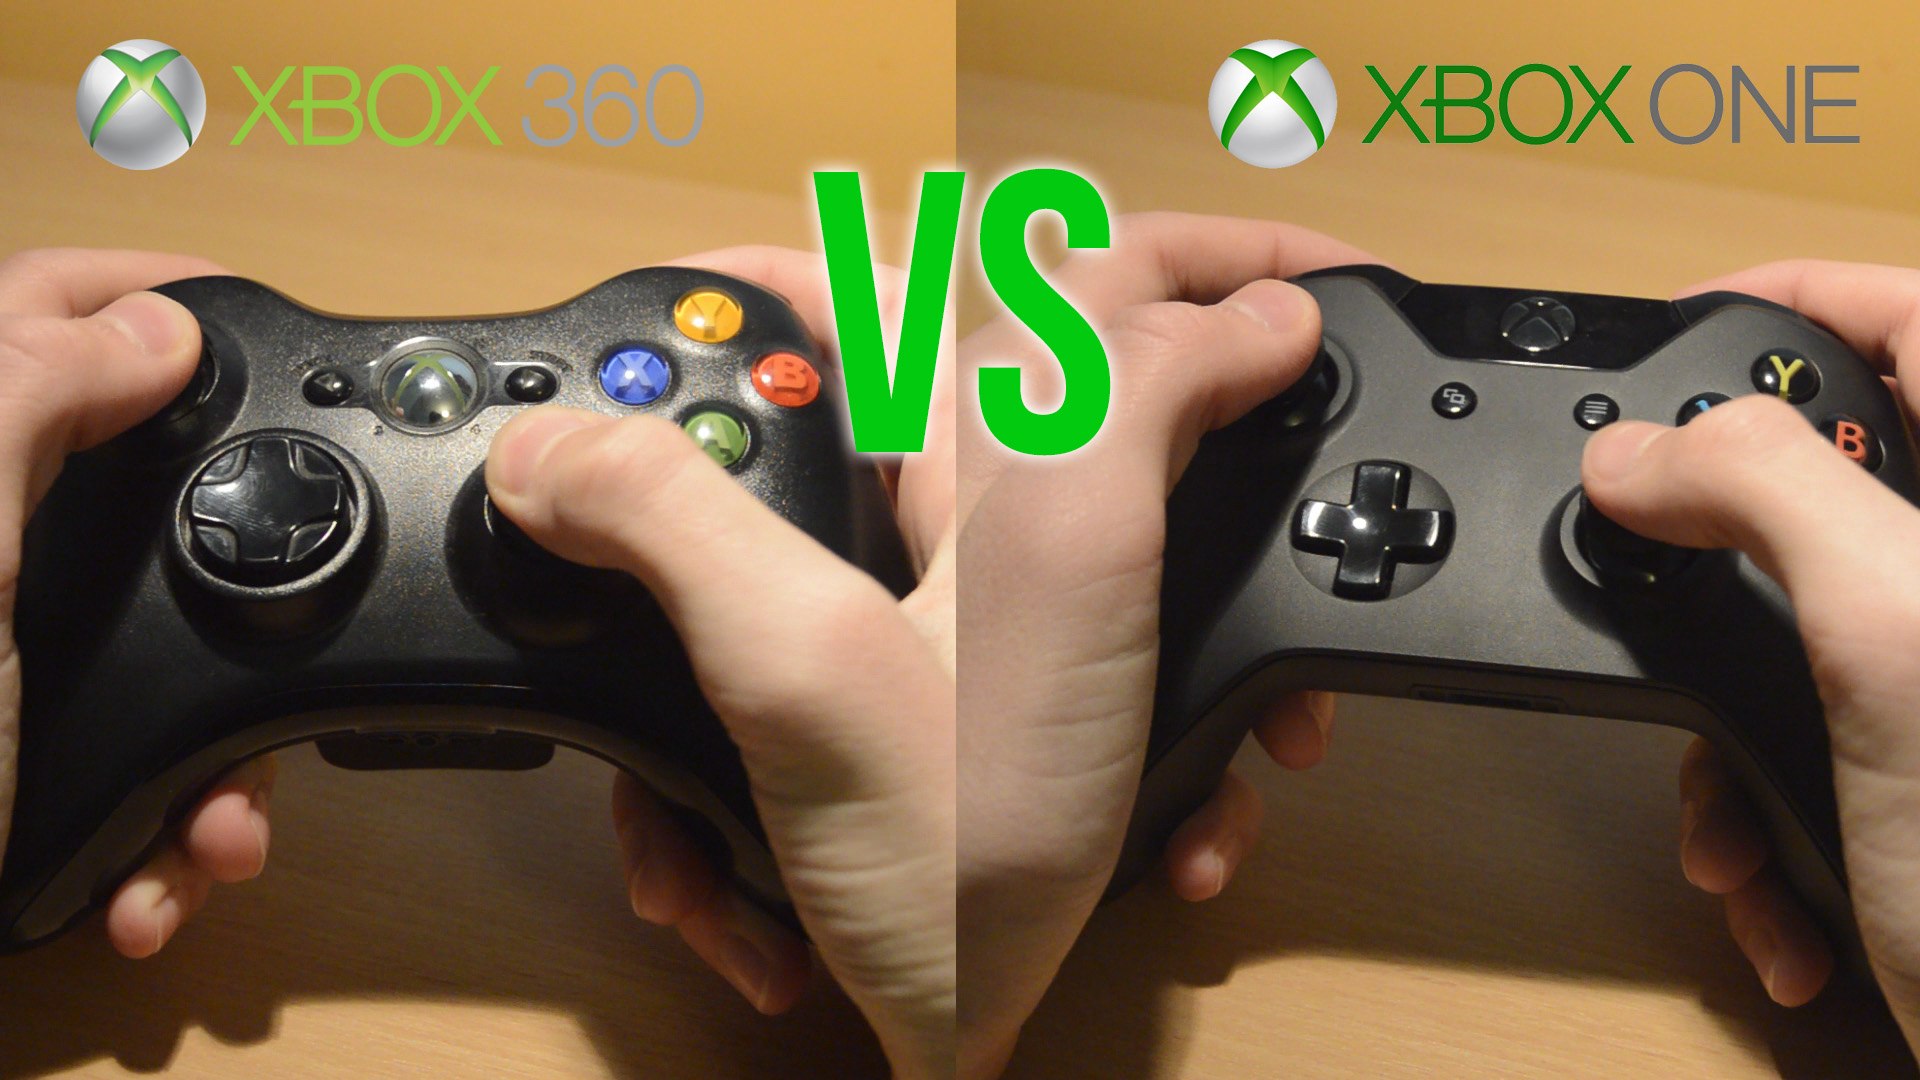 can i use an xbox 360 controller on an xbox one